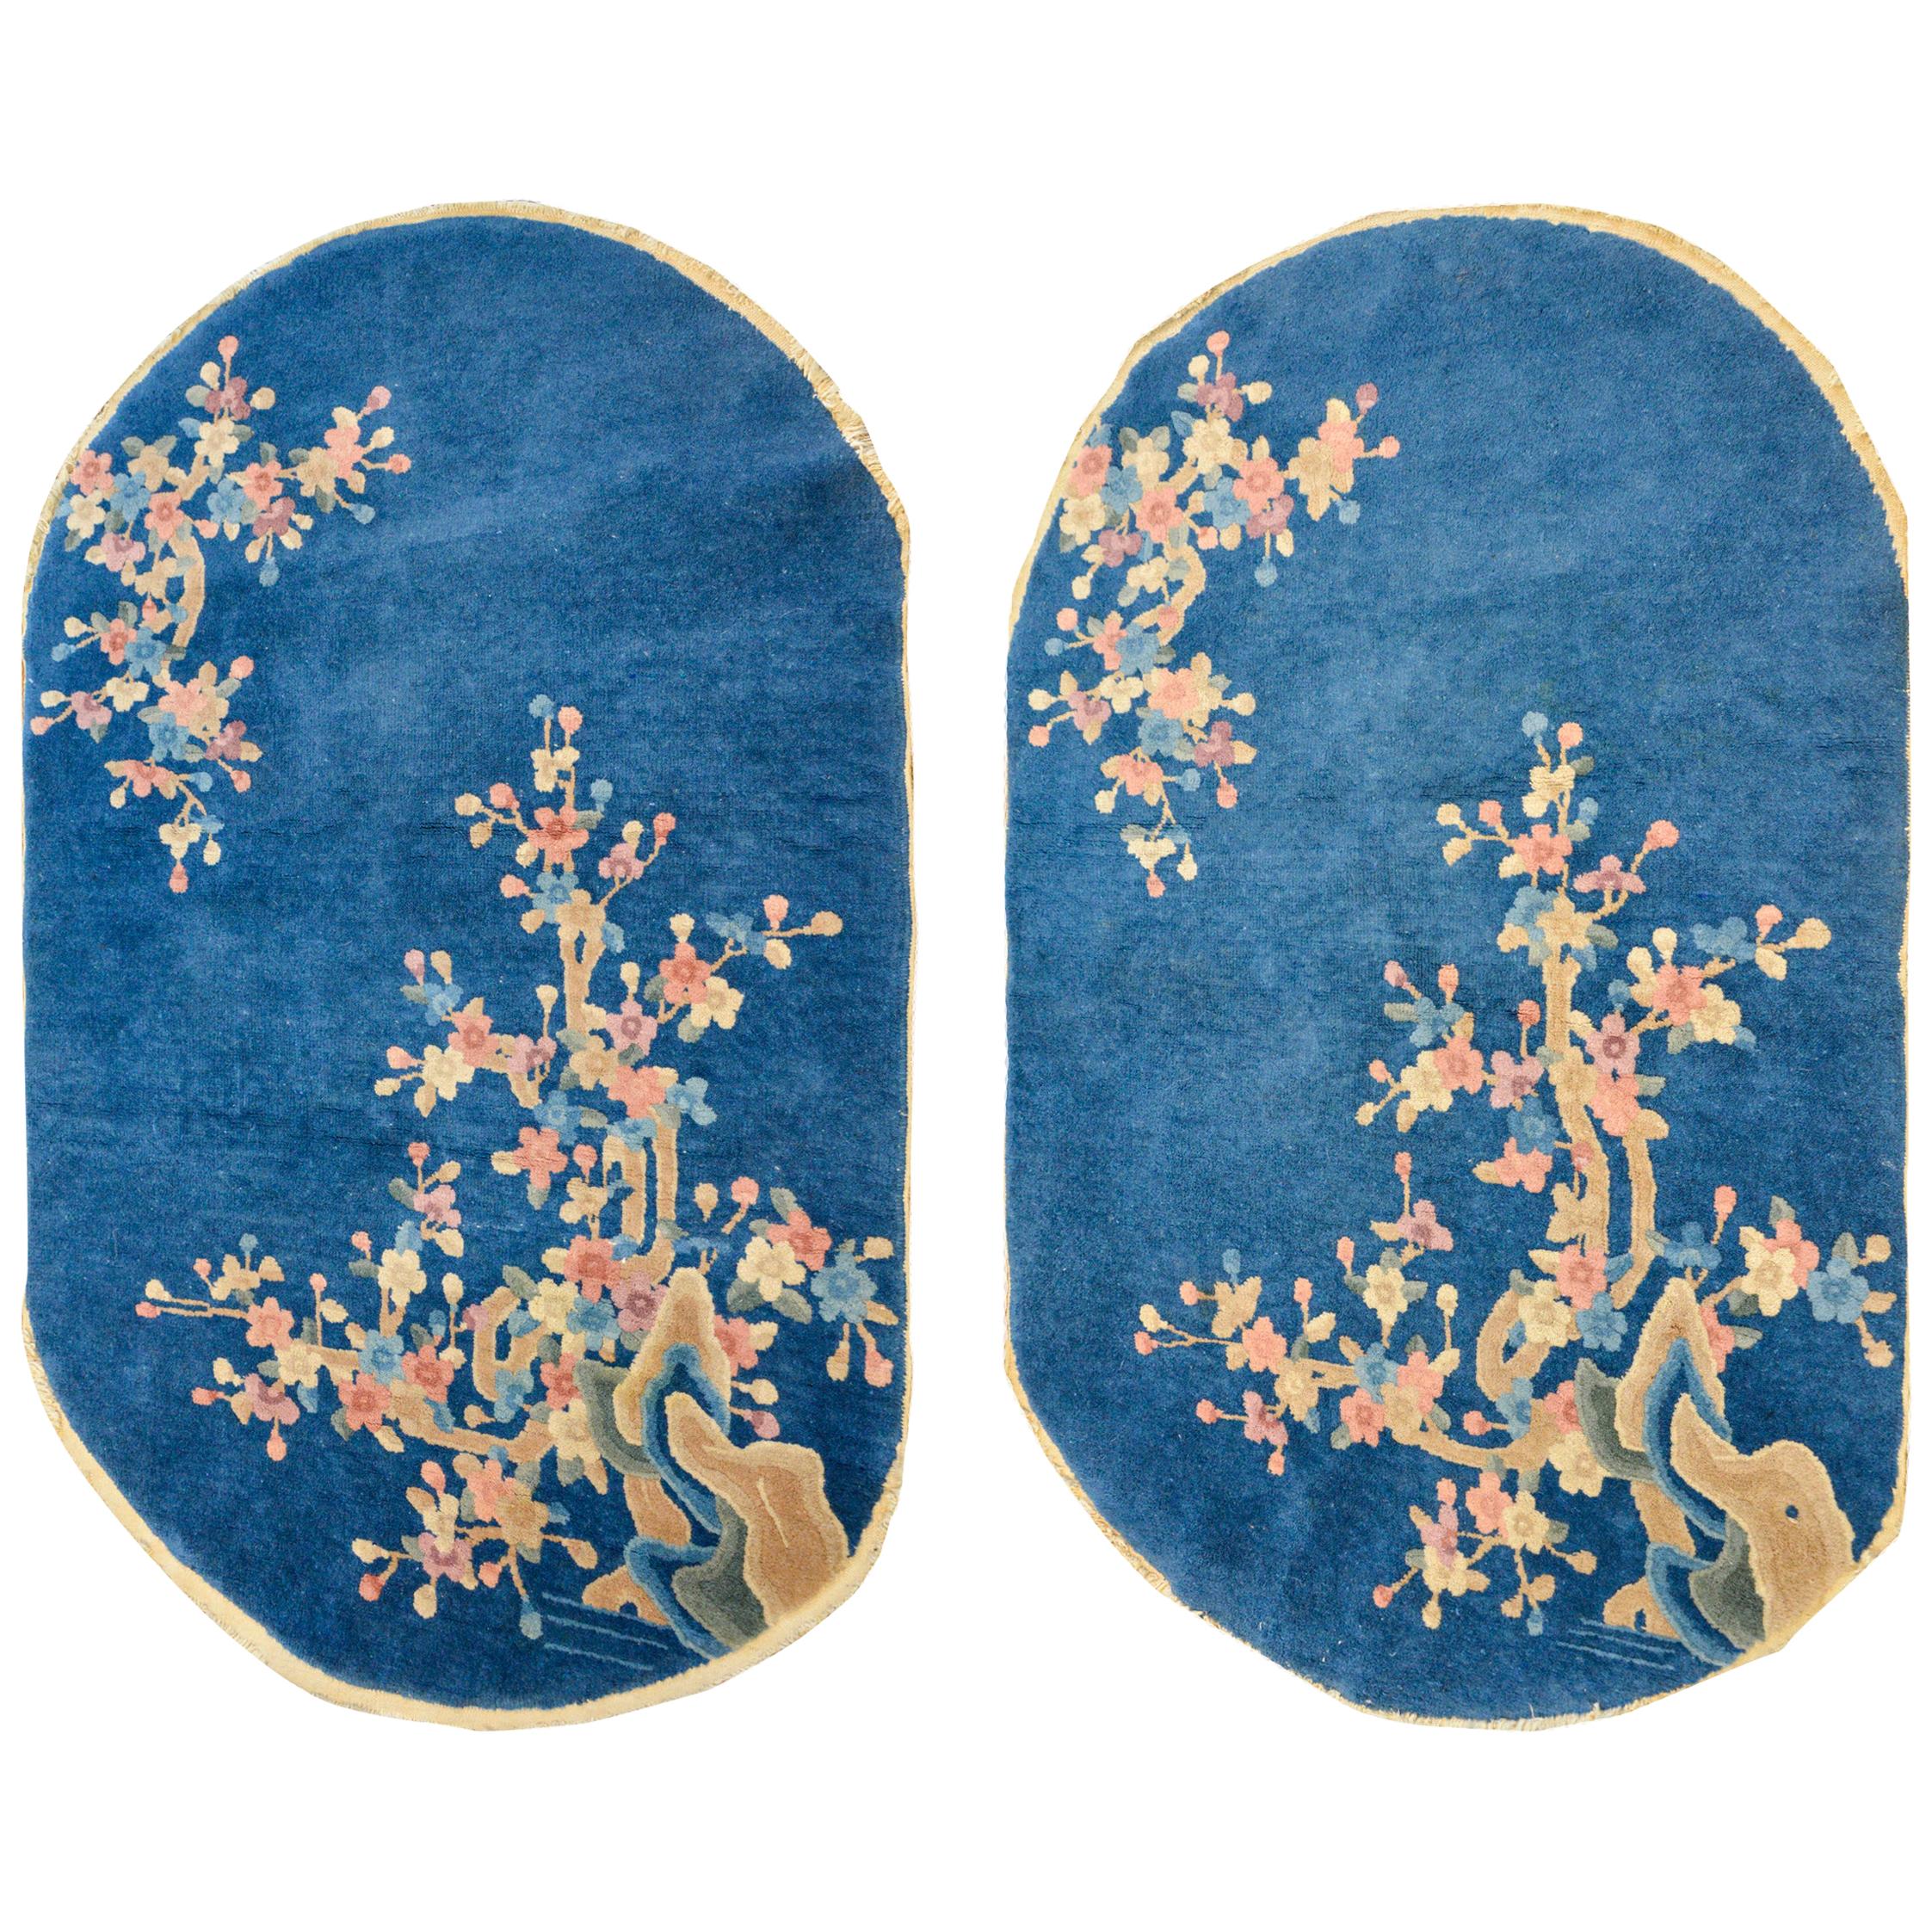 Pair of Early 20th Century Chinese Art Deco Oval Rugs